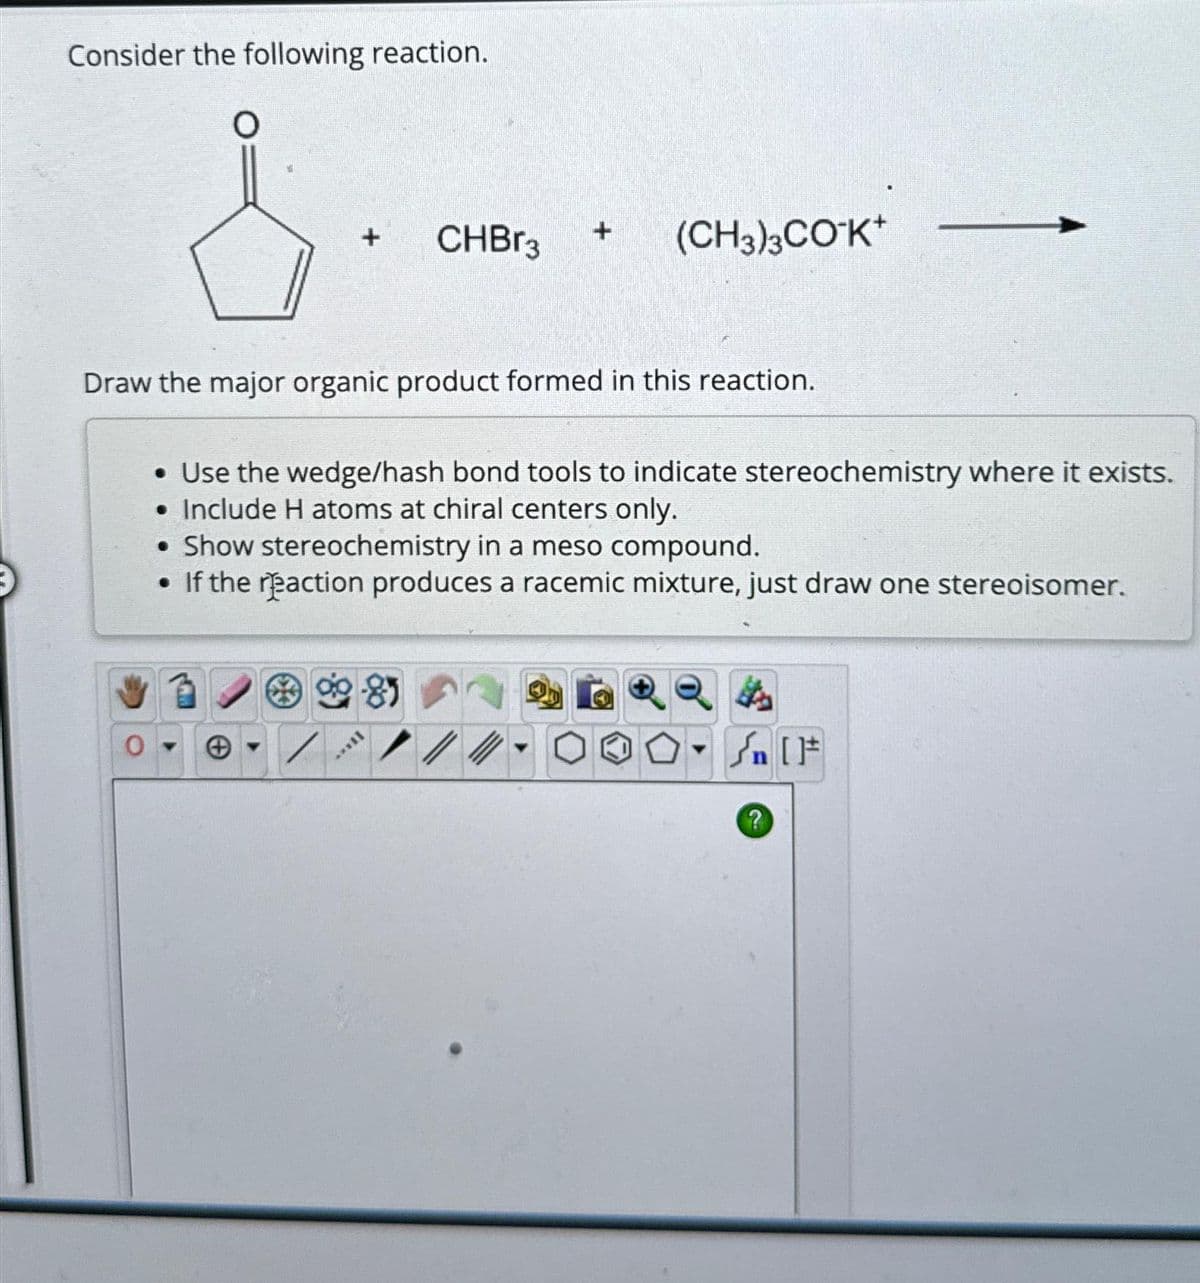 Consider the following reaction.
O
+
0
CHBr3
Draw the major organic product formed in this reaction.
81
+
[****
(CH3)3CO¹K+
• Use the wedge/hash bond tools to indicate stereochemistry where it exists.
• Include H atoms at chiral centers only.
• Show stereochemistry in a meso compound.
If the reaction produces a racemic mixture, just draw one stereoisomer.
- √n [F]
?